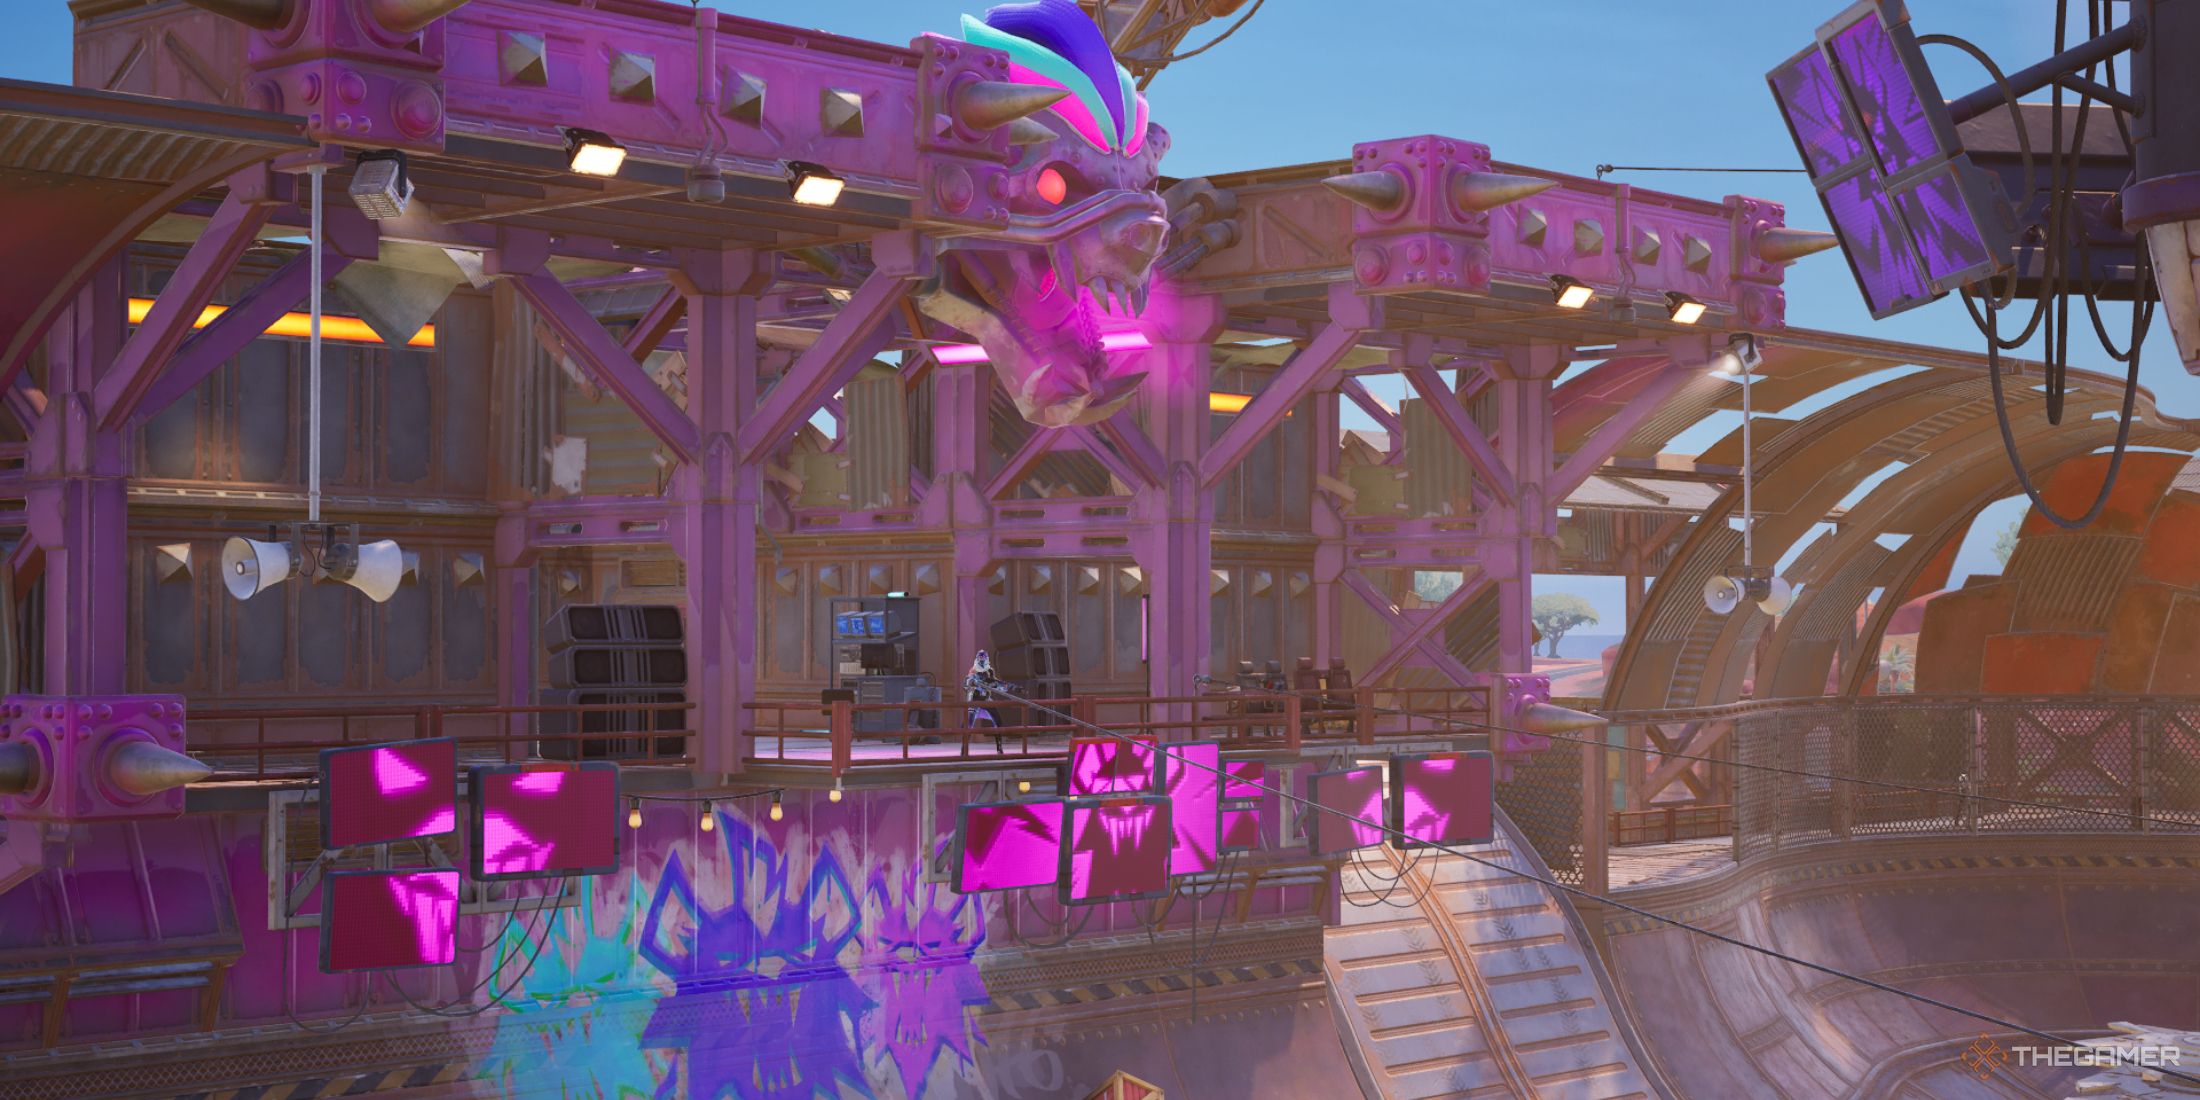 The Nitrodome's stage with pink paint across the metal structures and metallic wolf's face that has pink smoke coming out of the mouth. There are pink screens that connect to show a wolf's face under the stage.